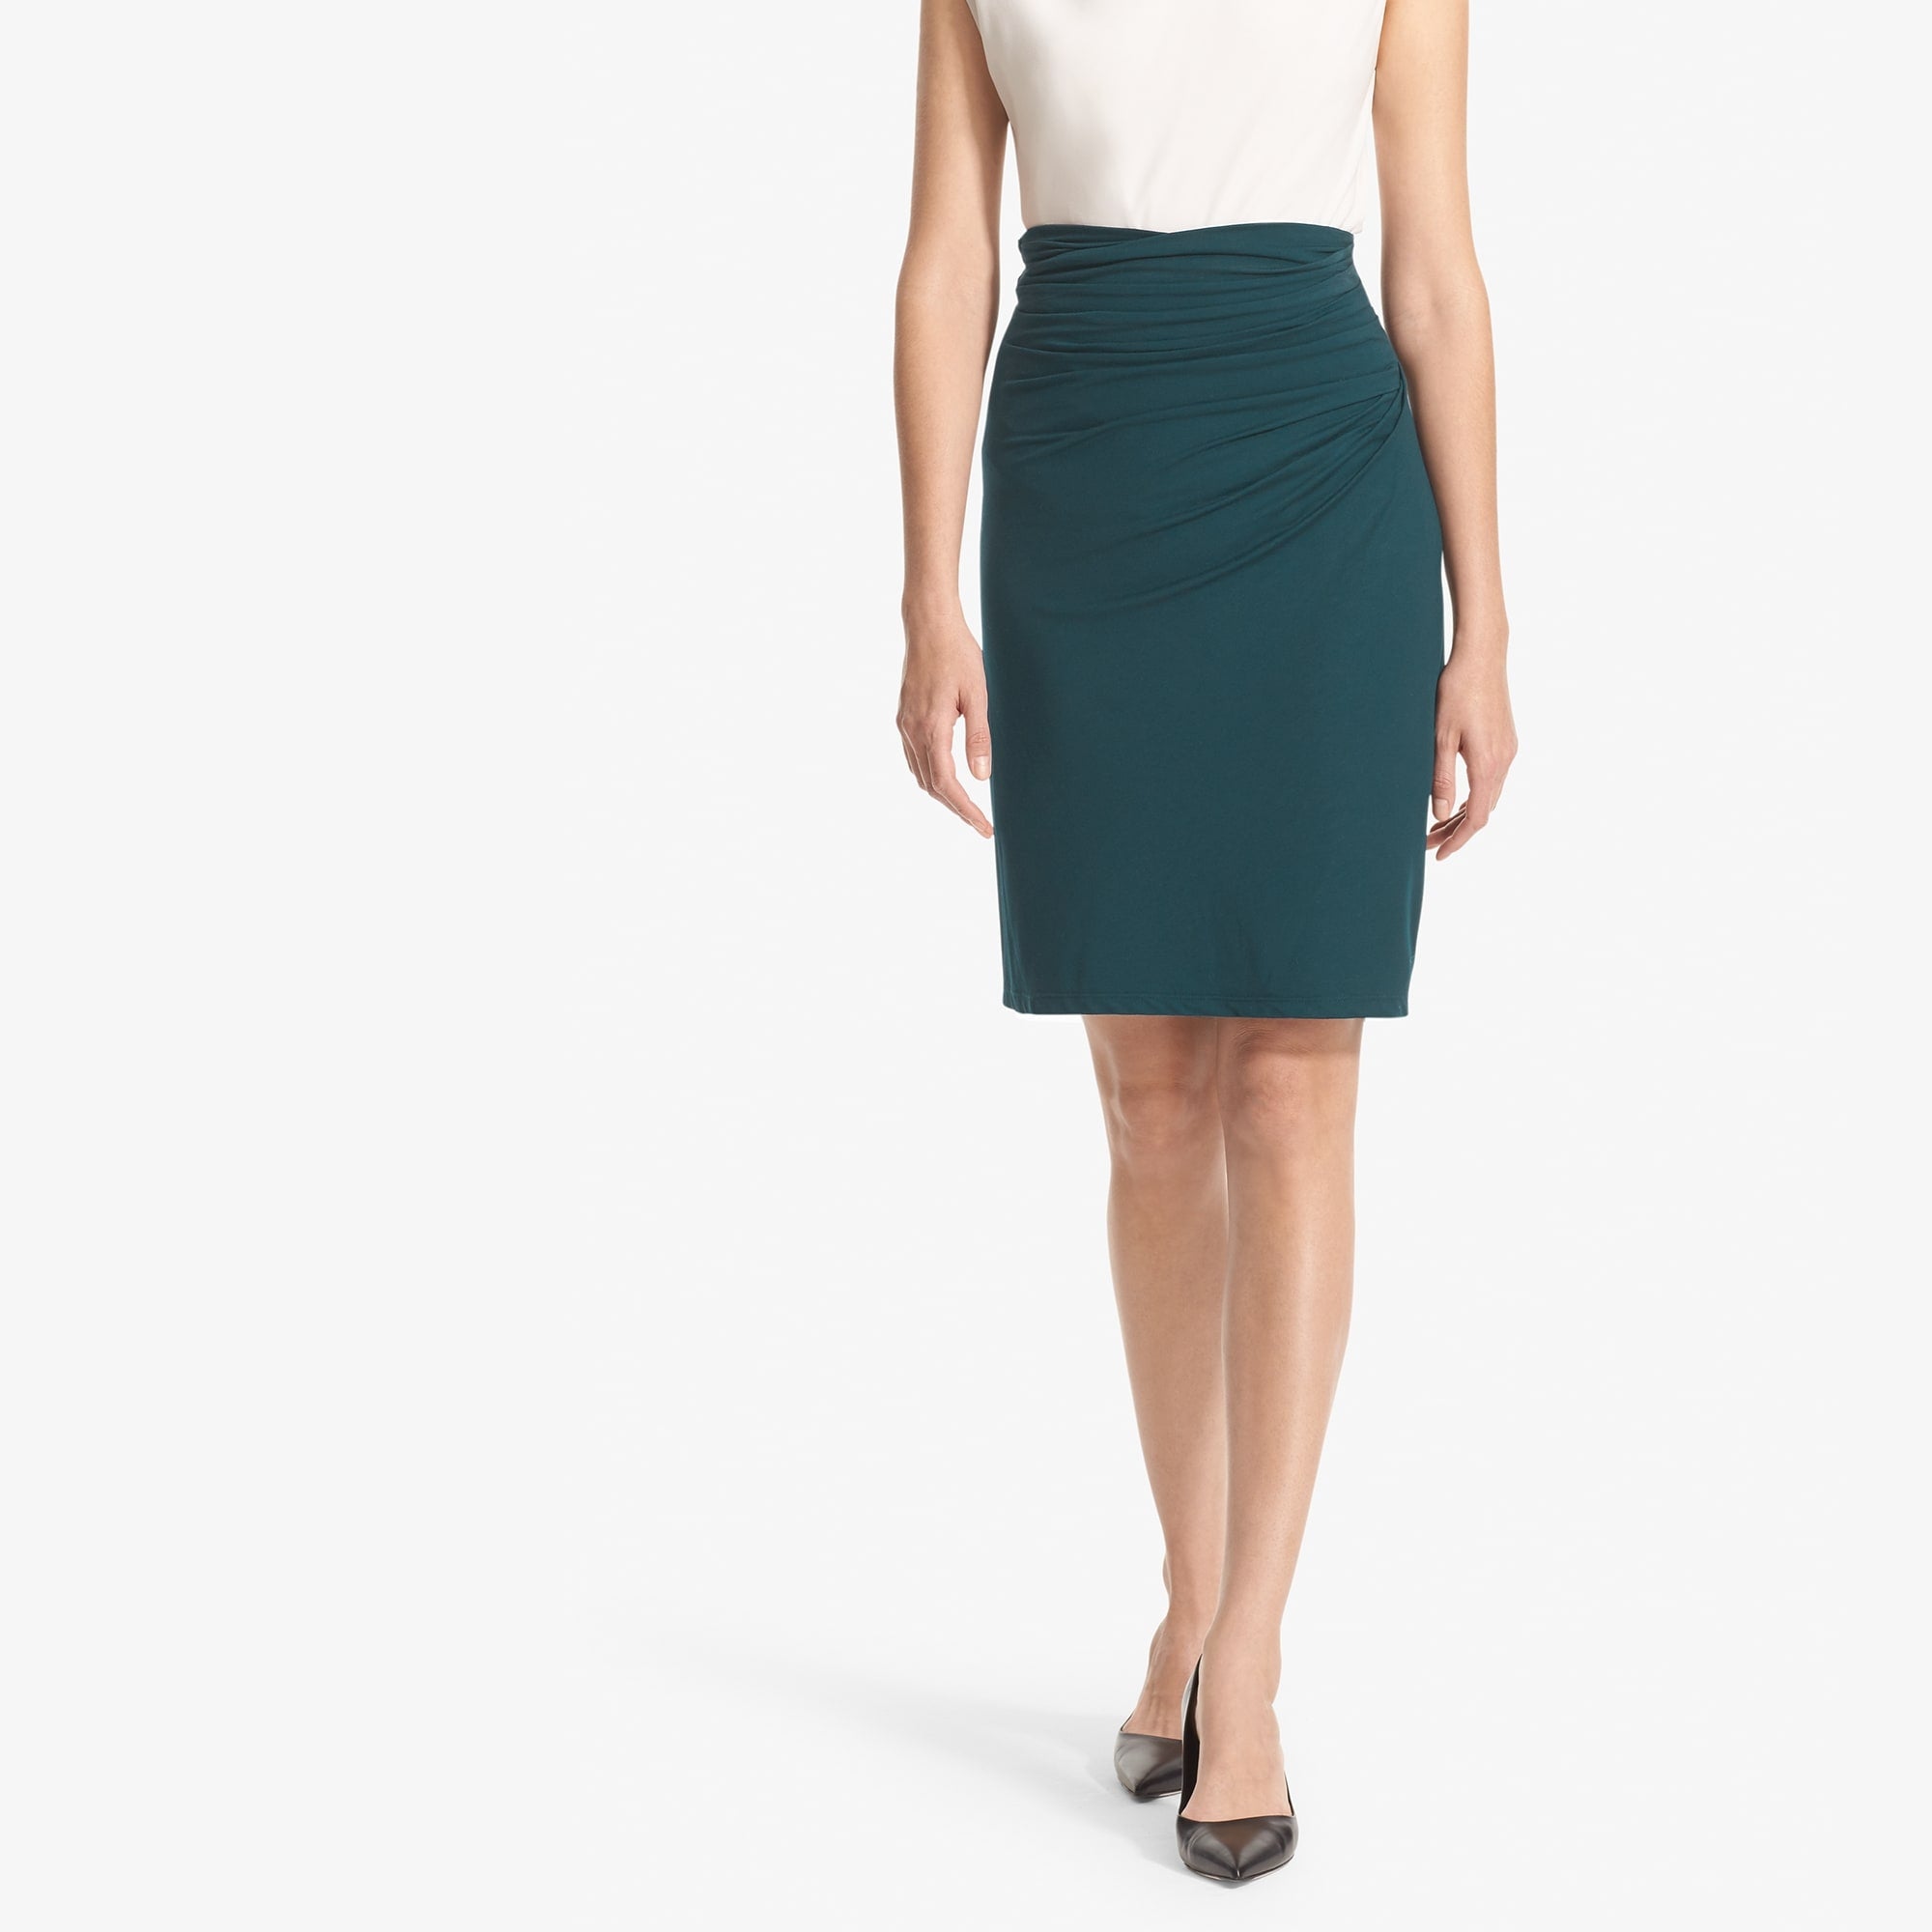 Front image of a woman standing wearing the Soho Skirt in Rainforest 